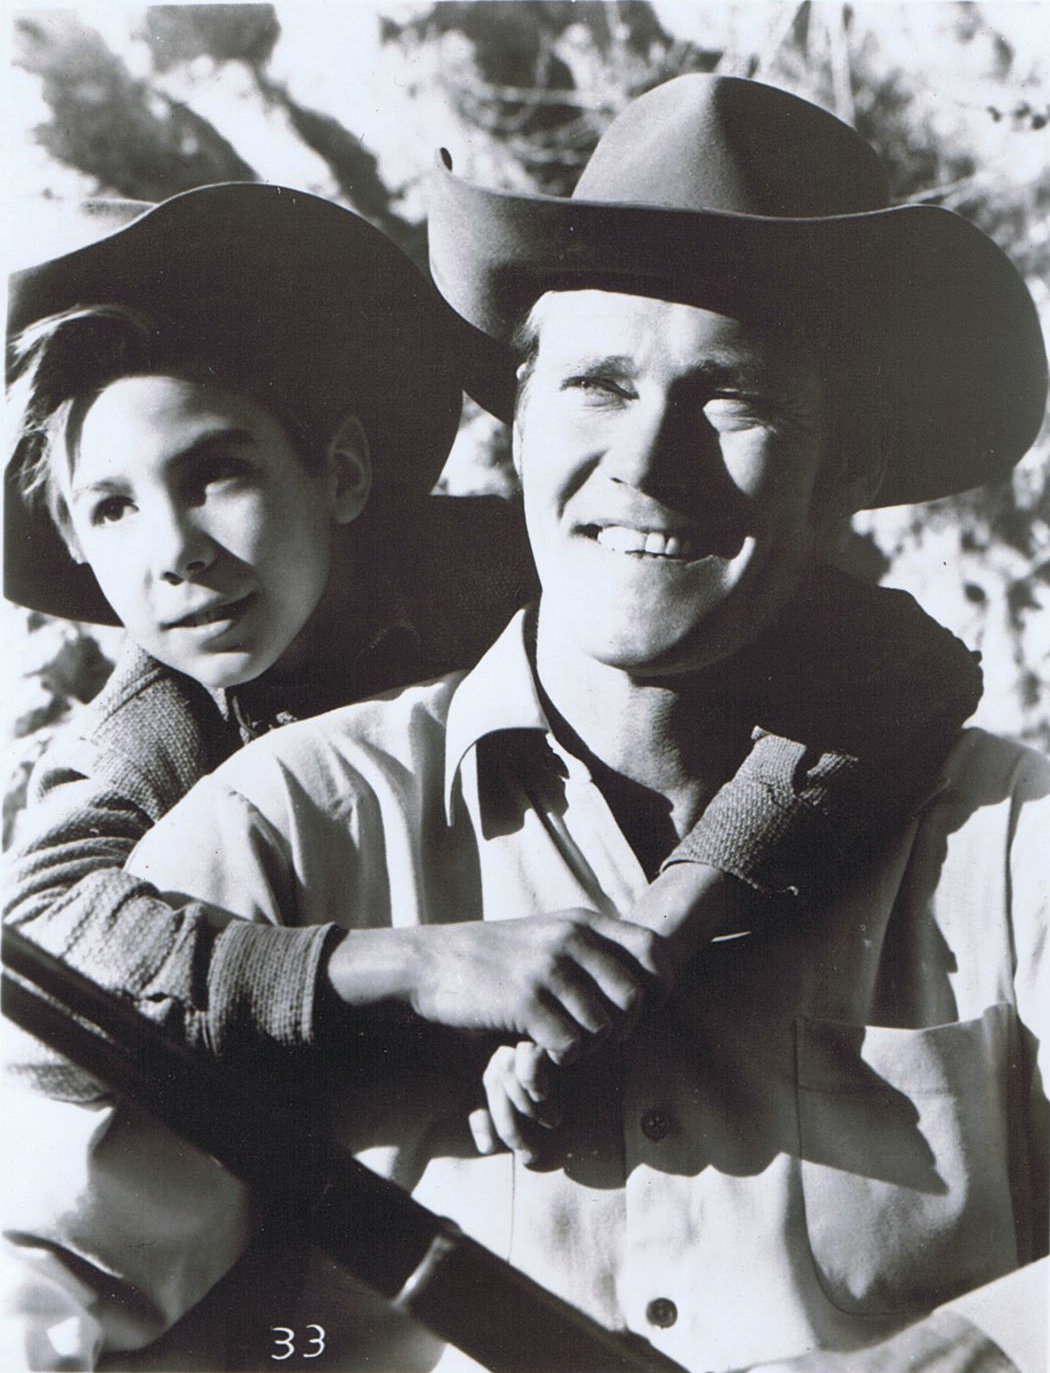 Connors and Crawford as the widower Lucas McCain and his young son, Mark, during a sunny day in North Fork.